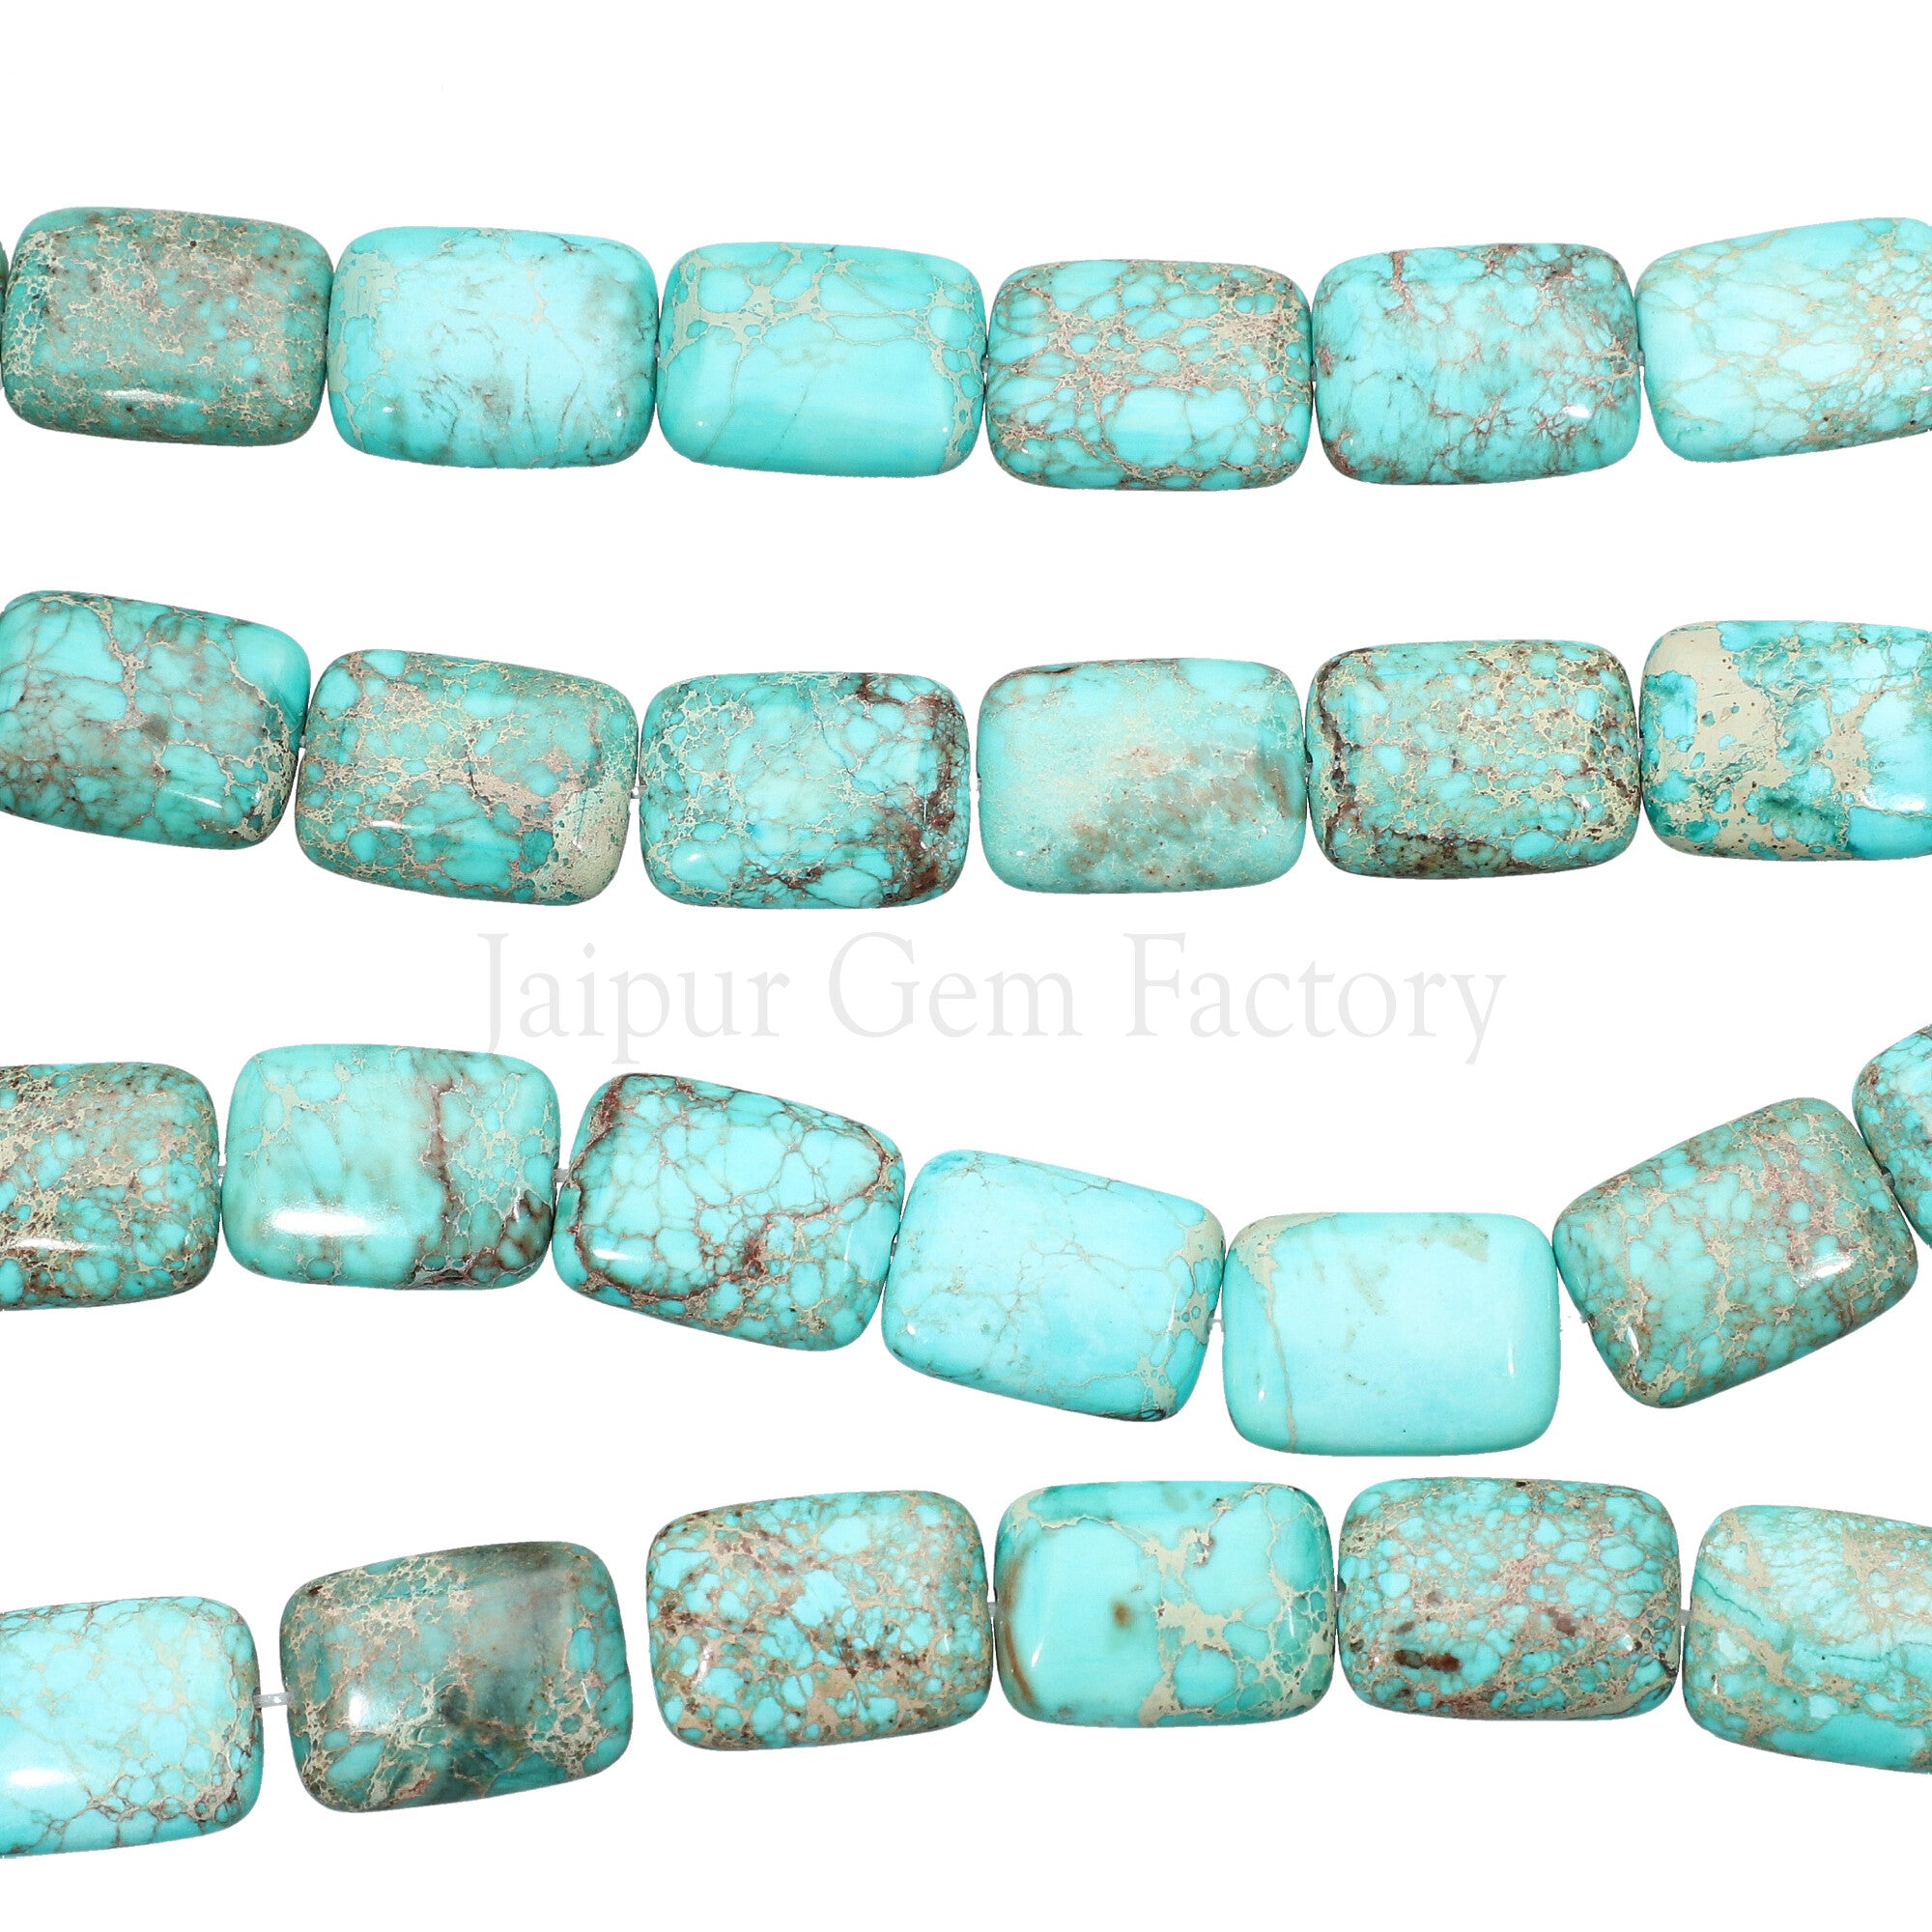 18X13 MM Turquoise Blue Impression Jasper Smooth Rectangle Beads 15 Inches Strand